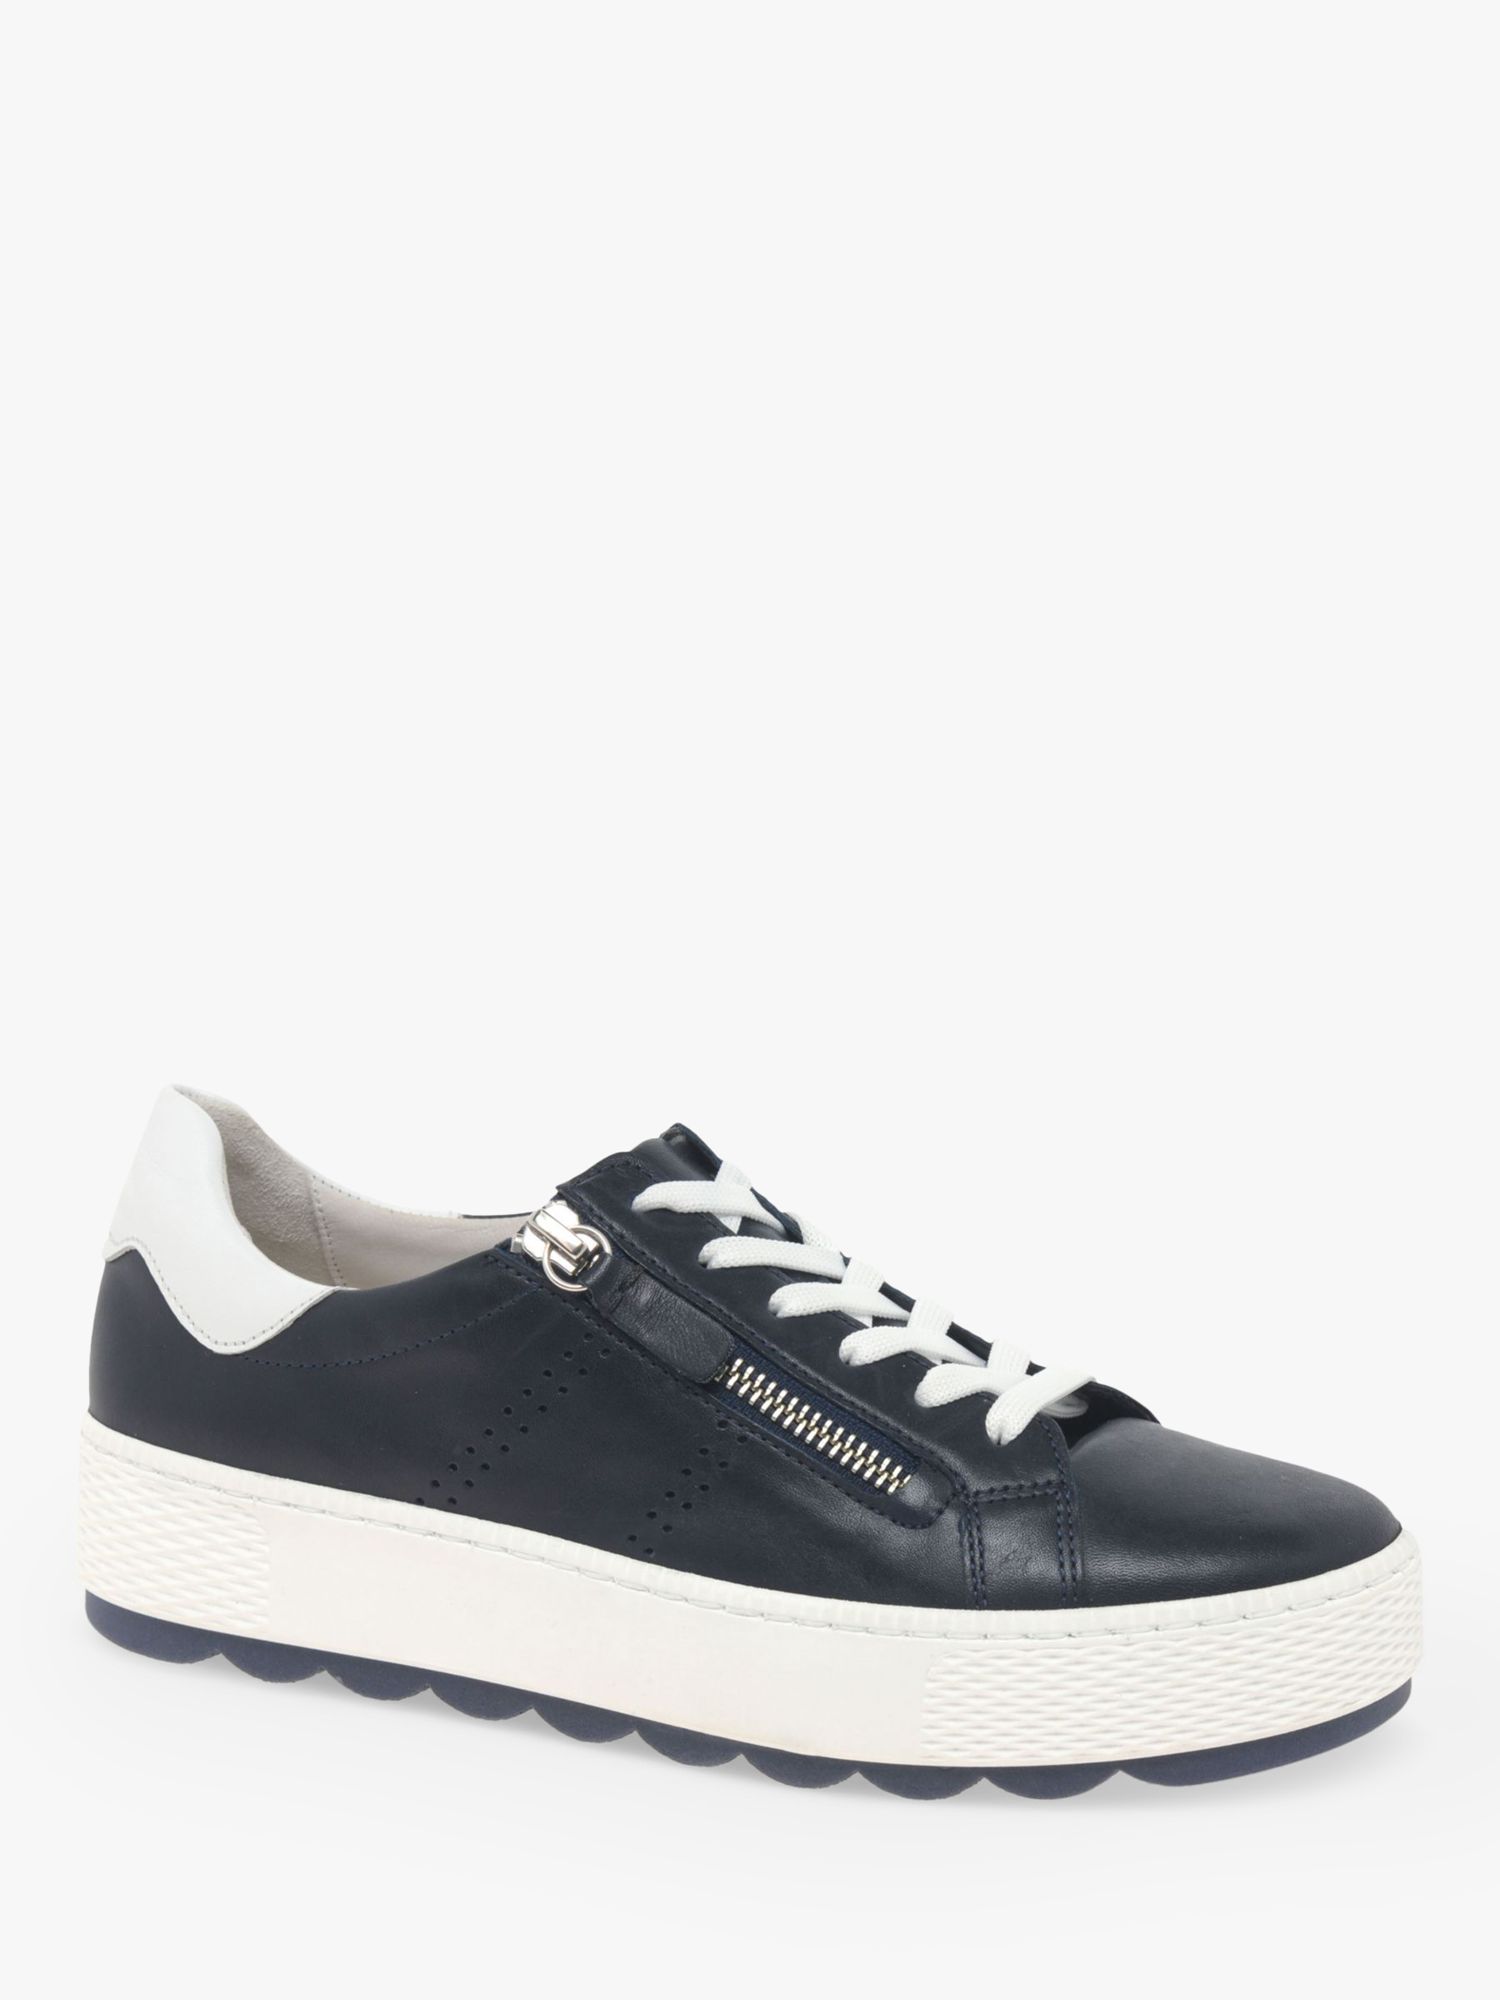 Gabor Quench Wide Fit Leather Zip Trim Trainers, Navy at John Lewis ...